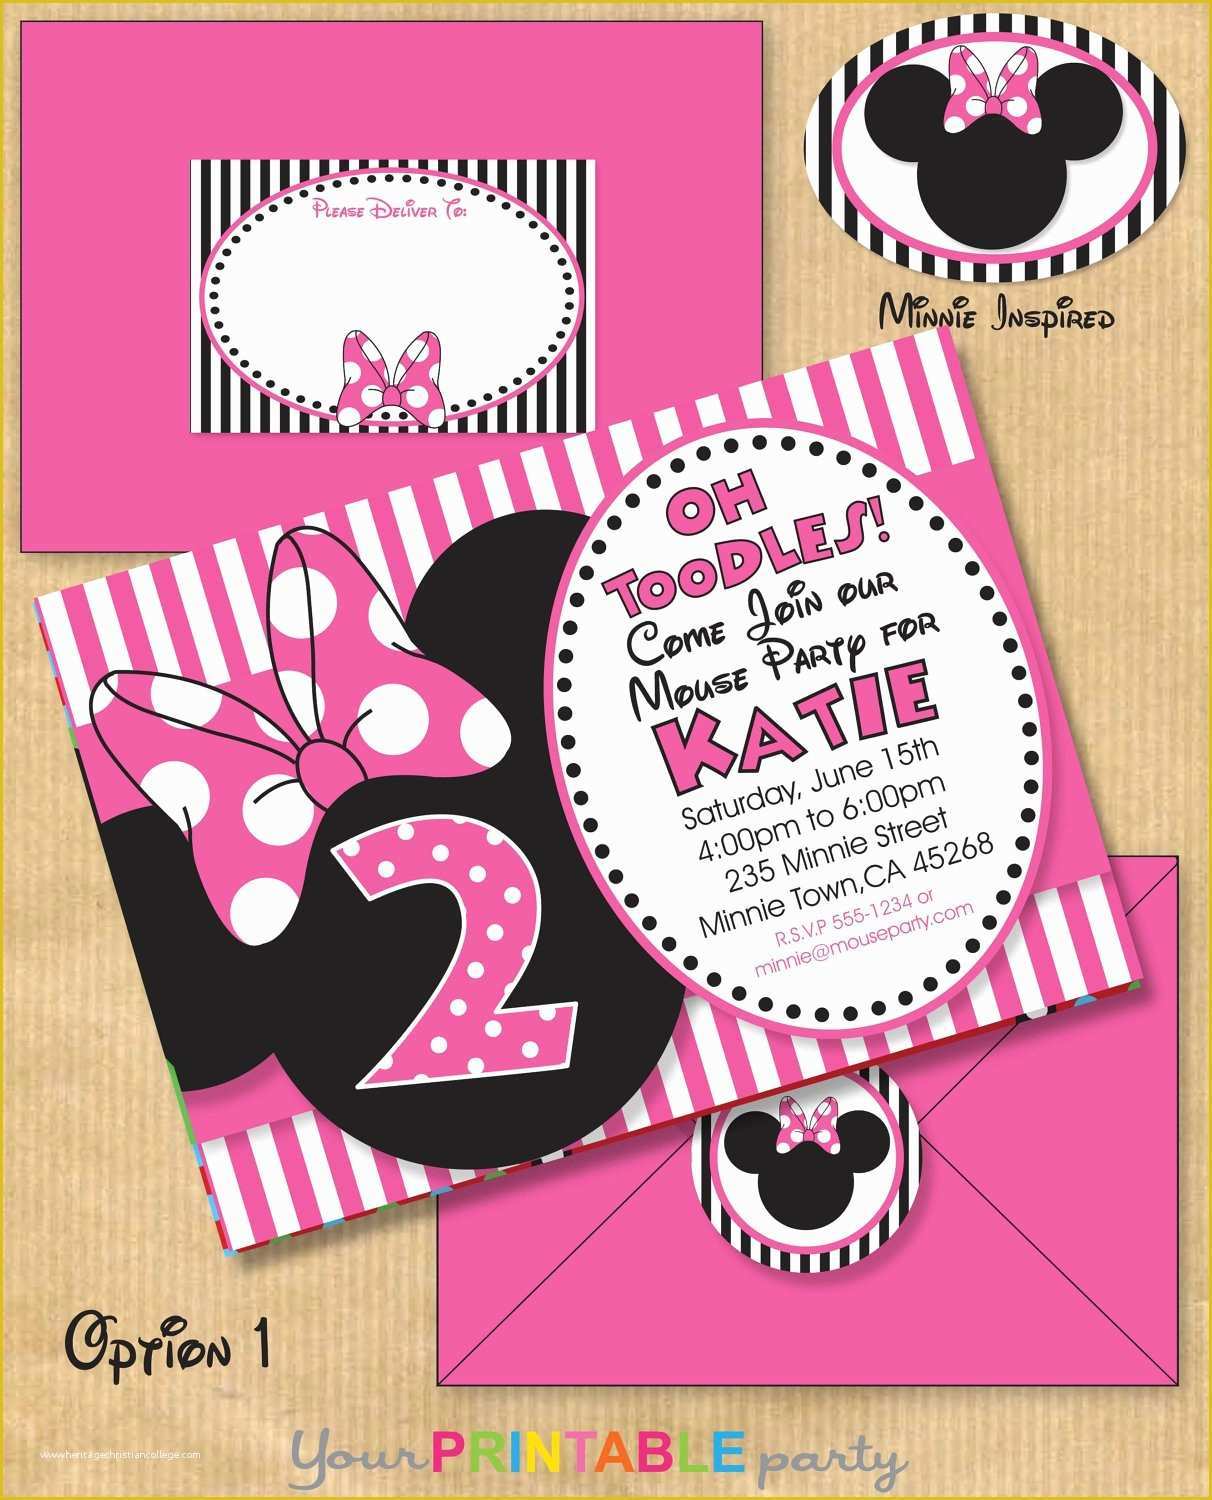 2nd Birthday Invitations Templates Free Of Minnie Mouse Inspired Birthday Party by Yourprintableparty